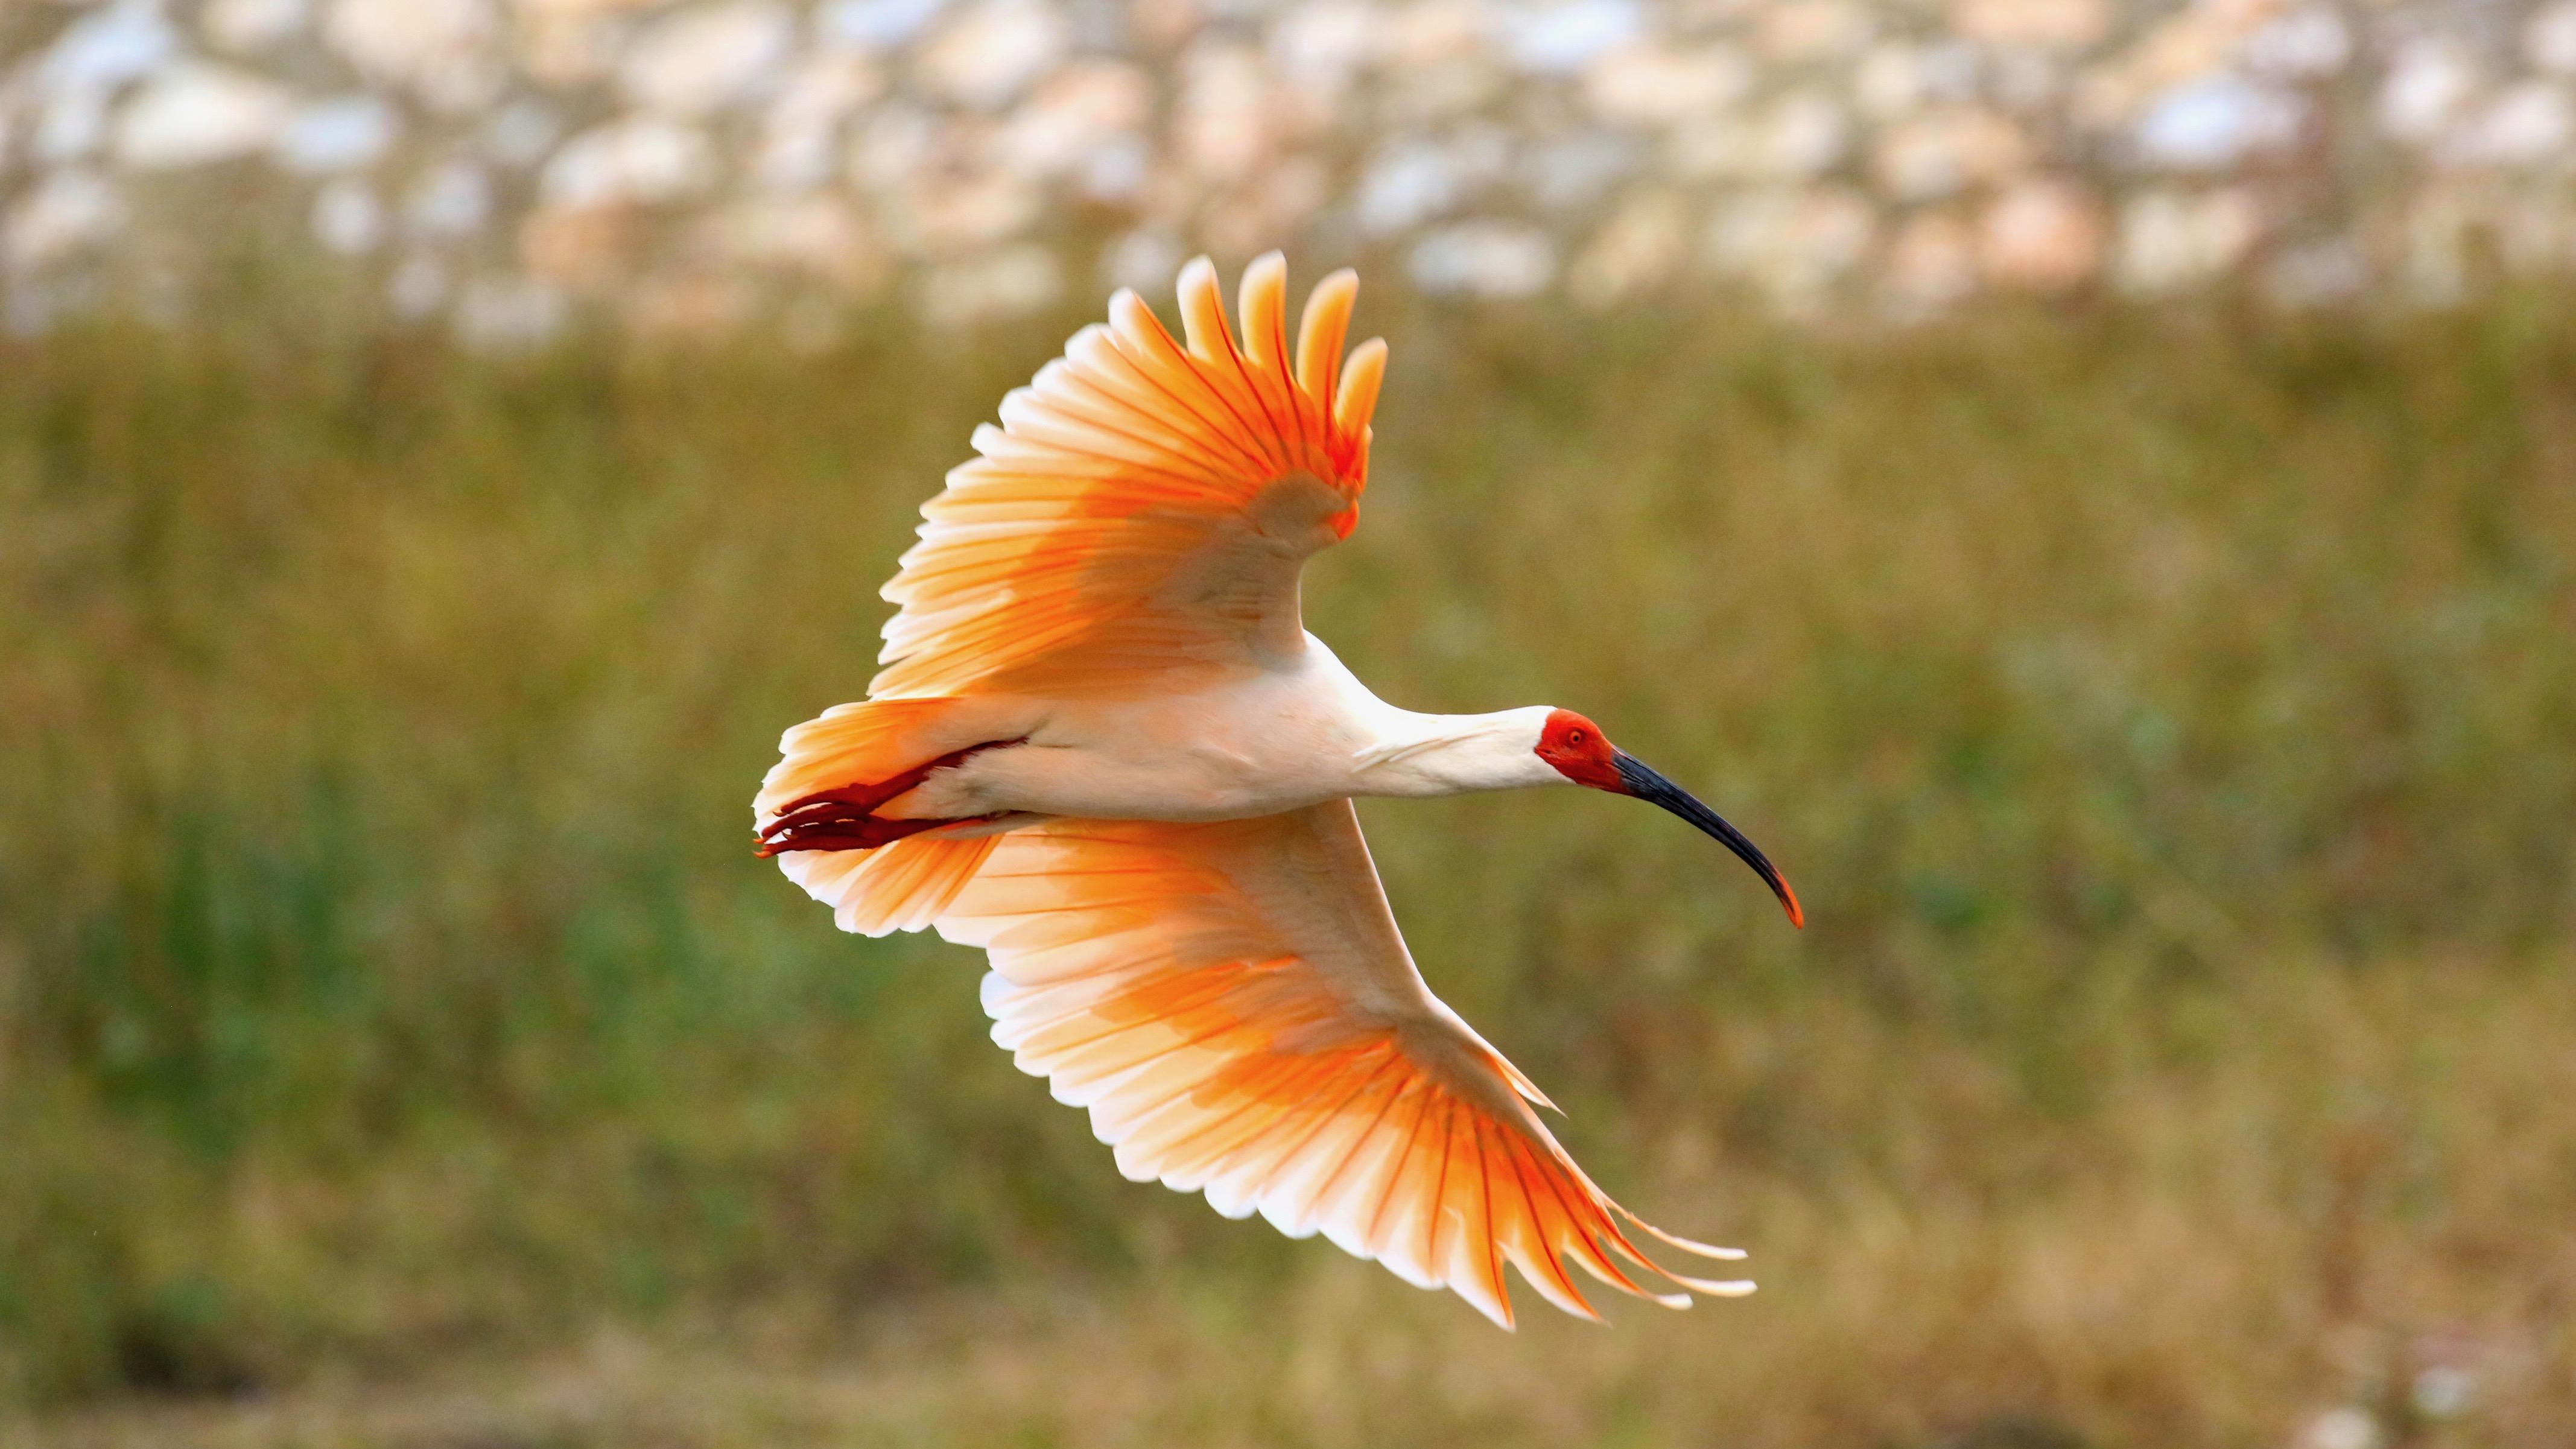 the inspiring journey to rescue the crested ibis – The Daily Worlds